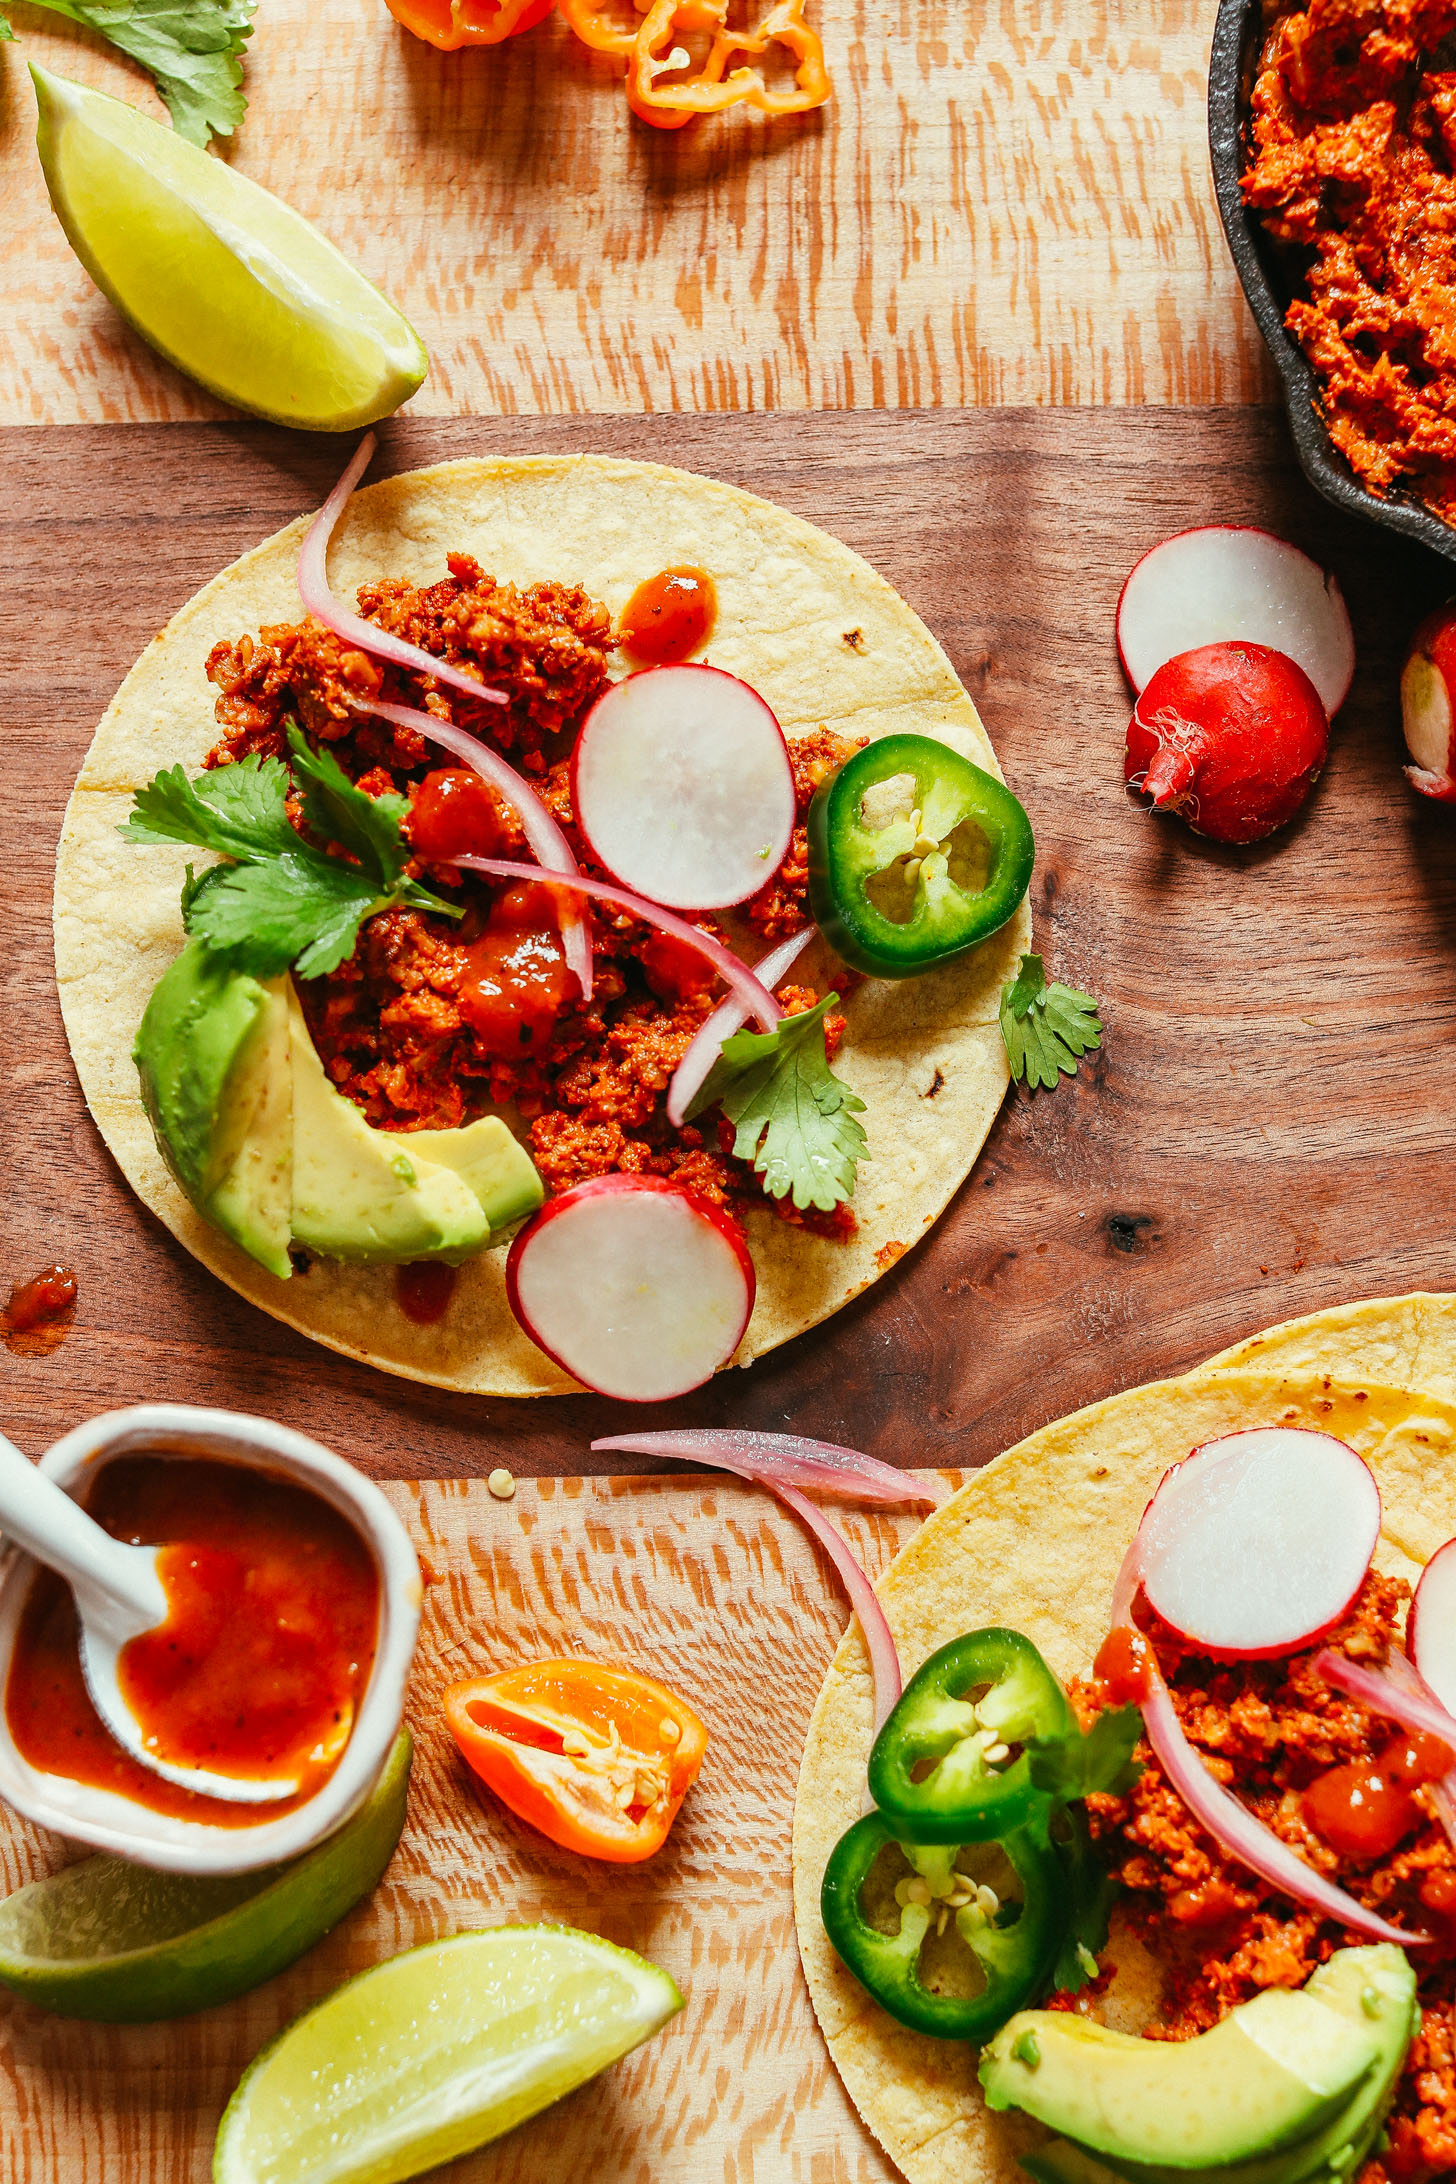 Tortillas topped with amazing Vegan Taco "Meat" inspired by Mexican flavors